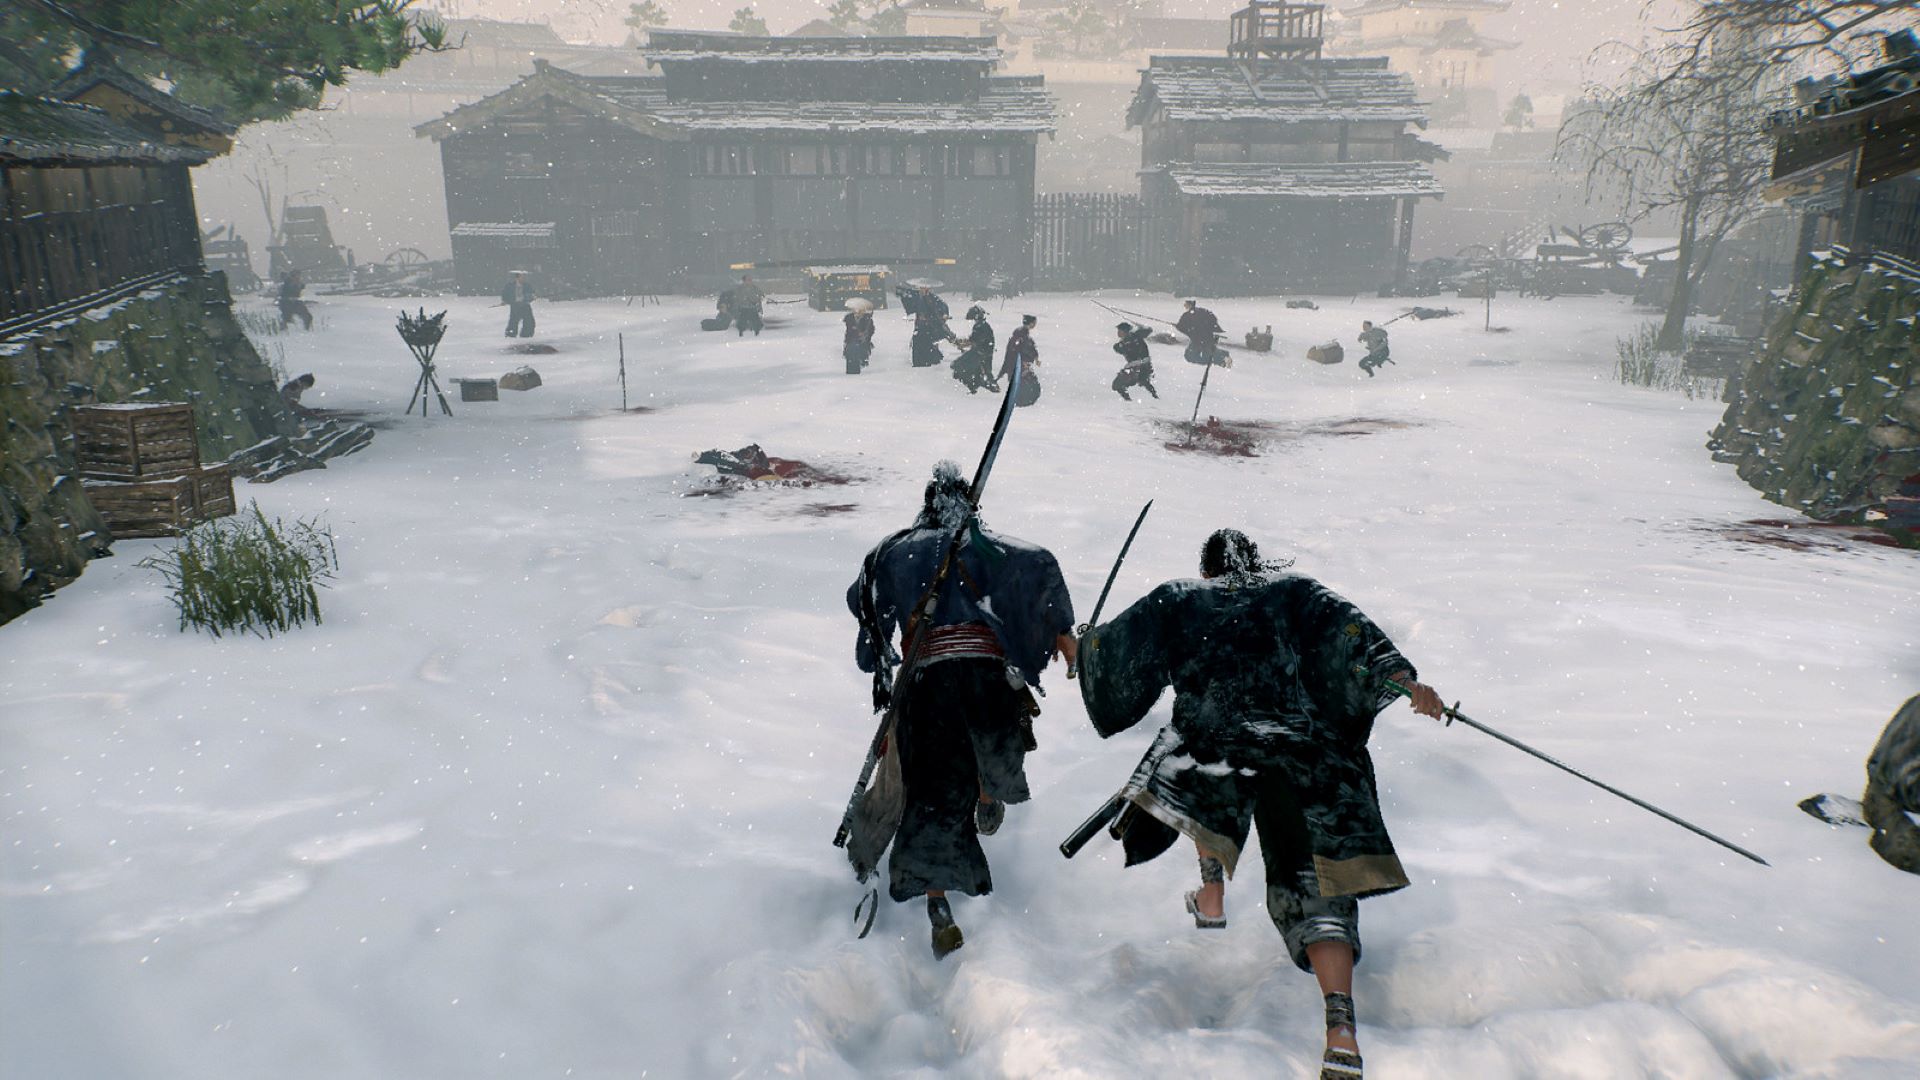 A screenshot from Rise of the Ronin